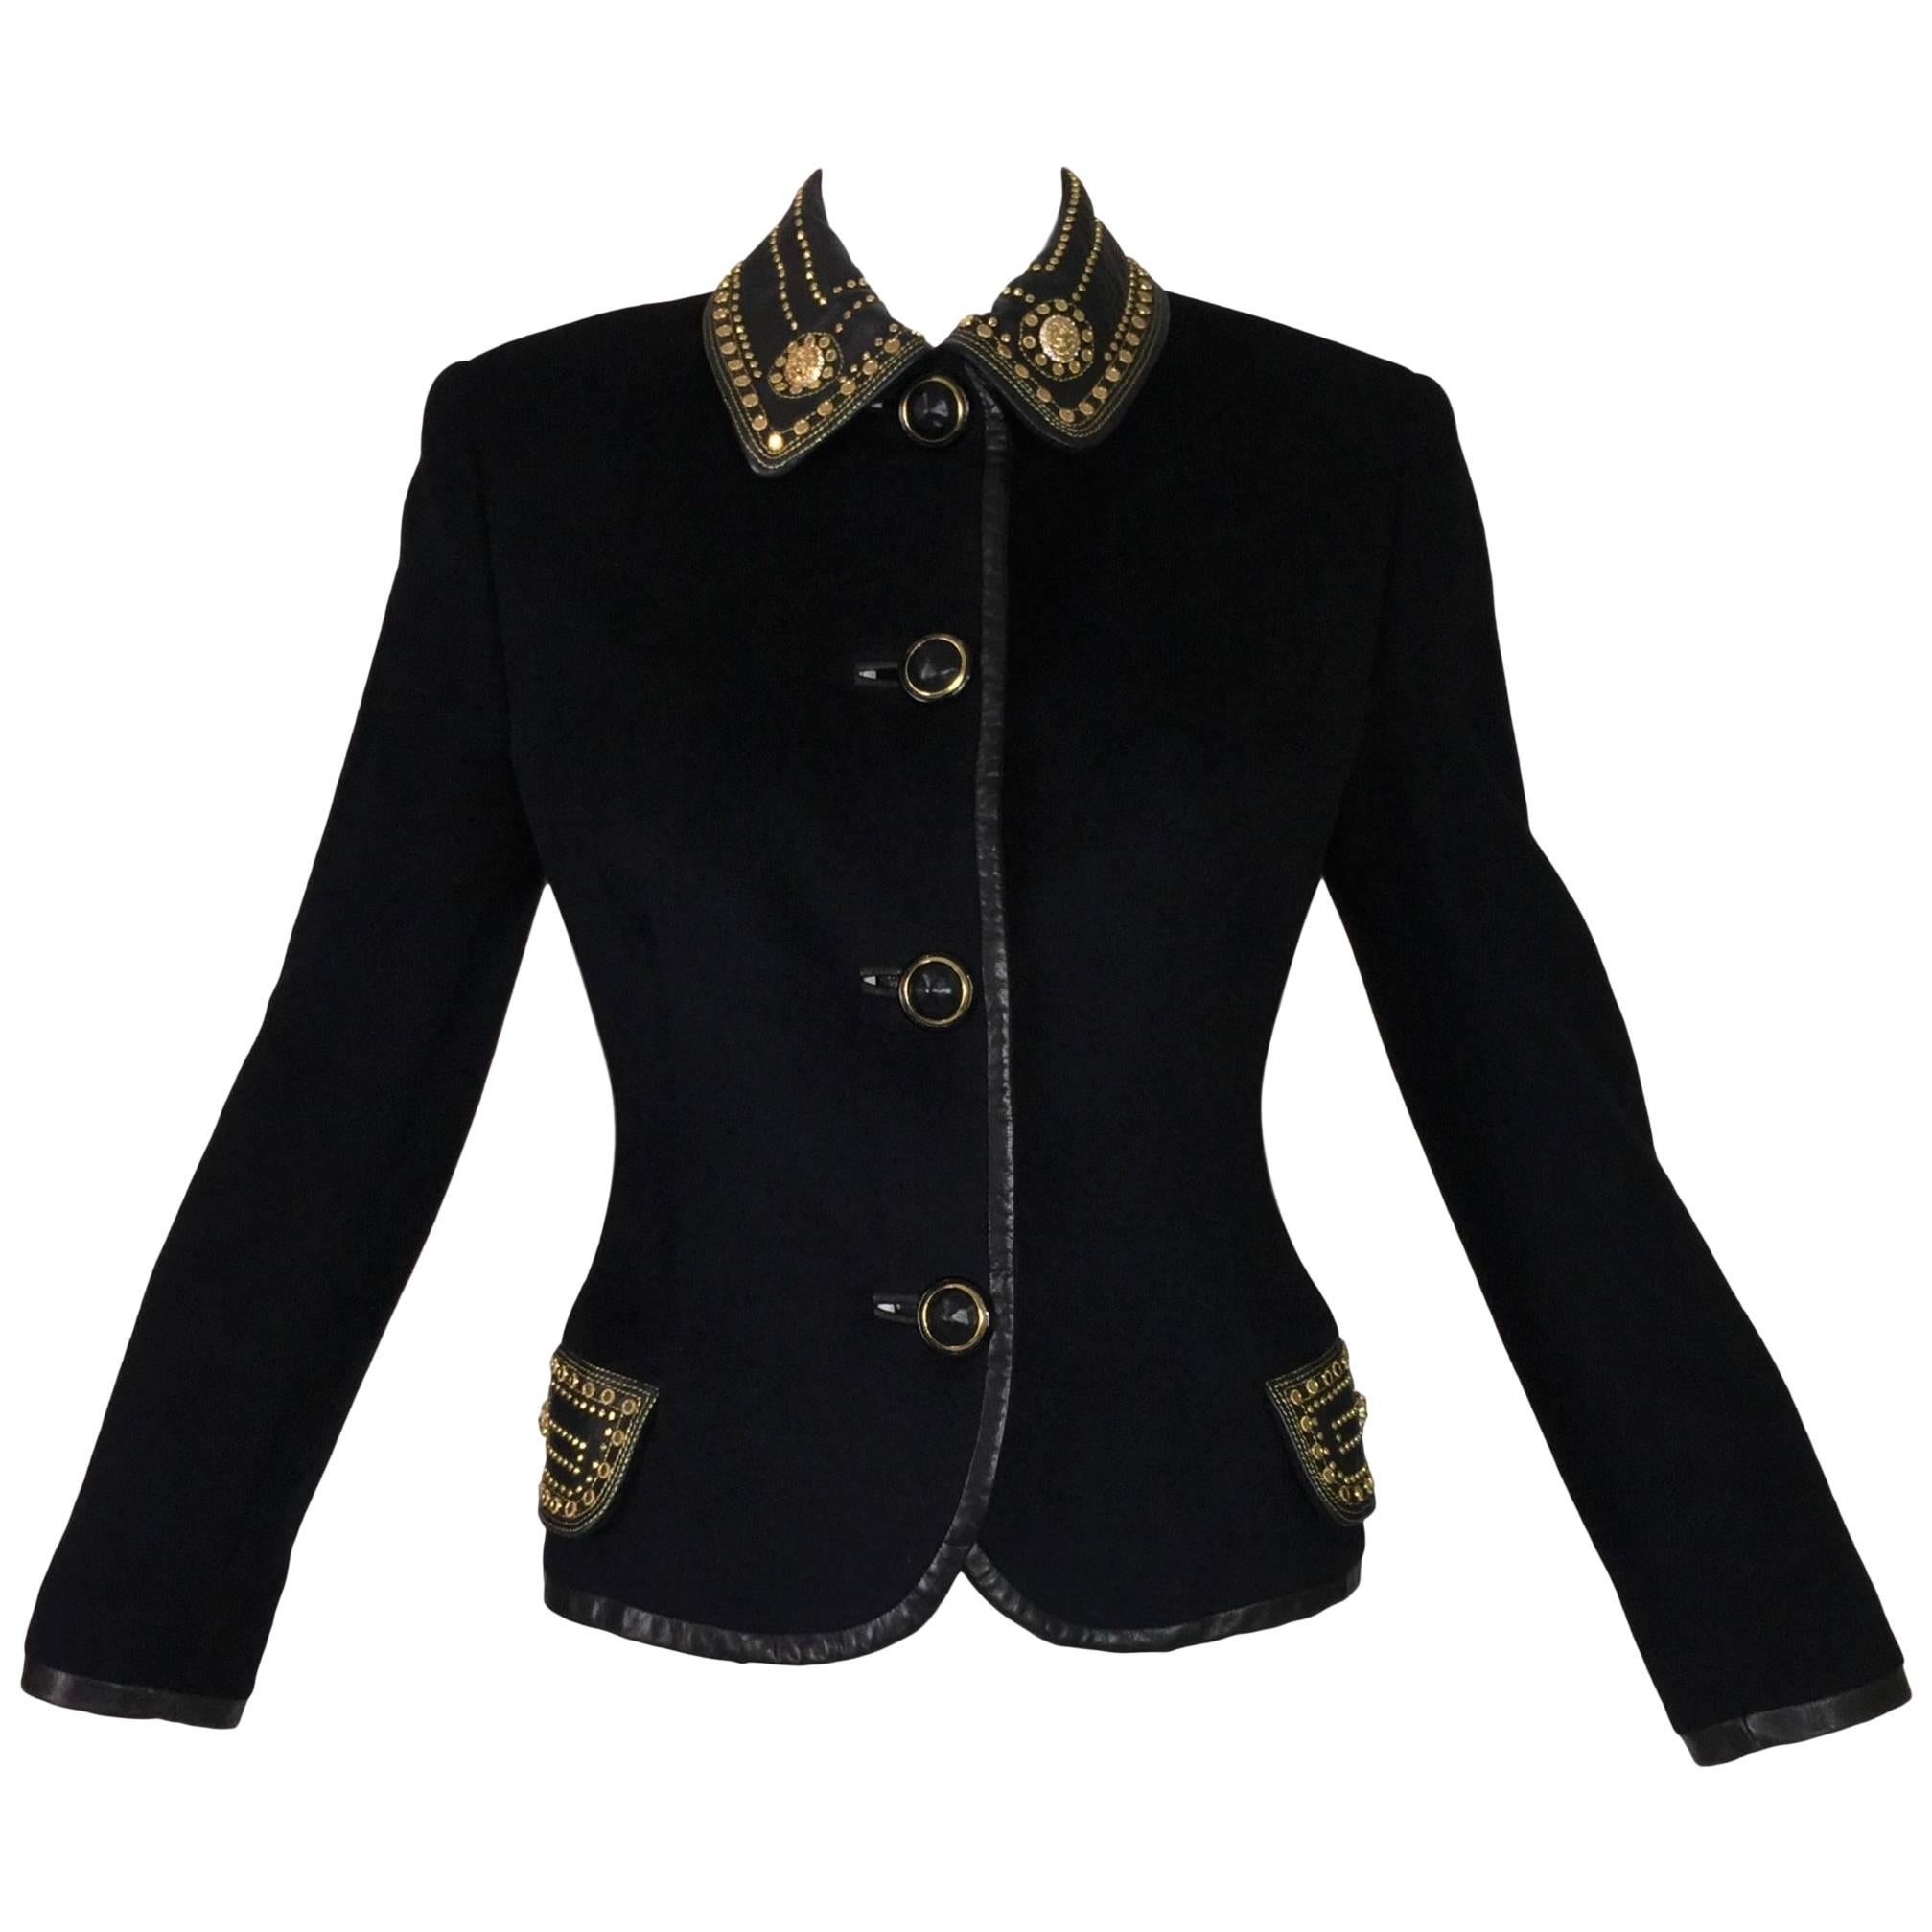 F/W 1992 Gianni Versace Couture Studded Bondage Black Fitted Wool Jacket 40